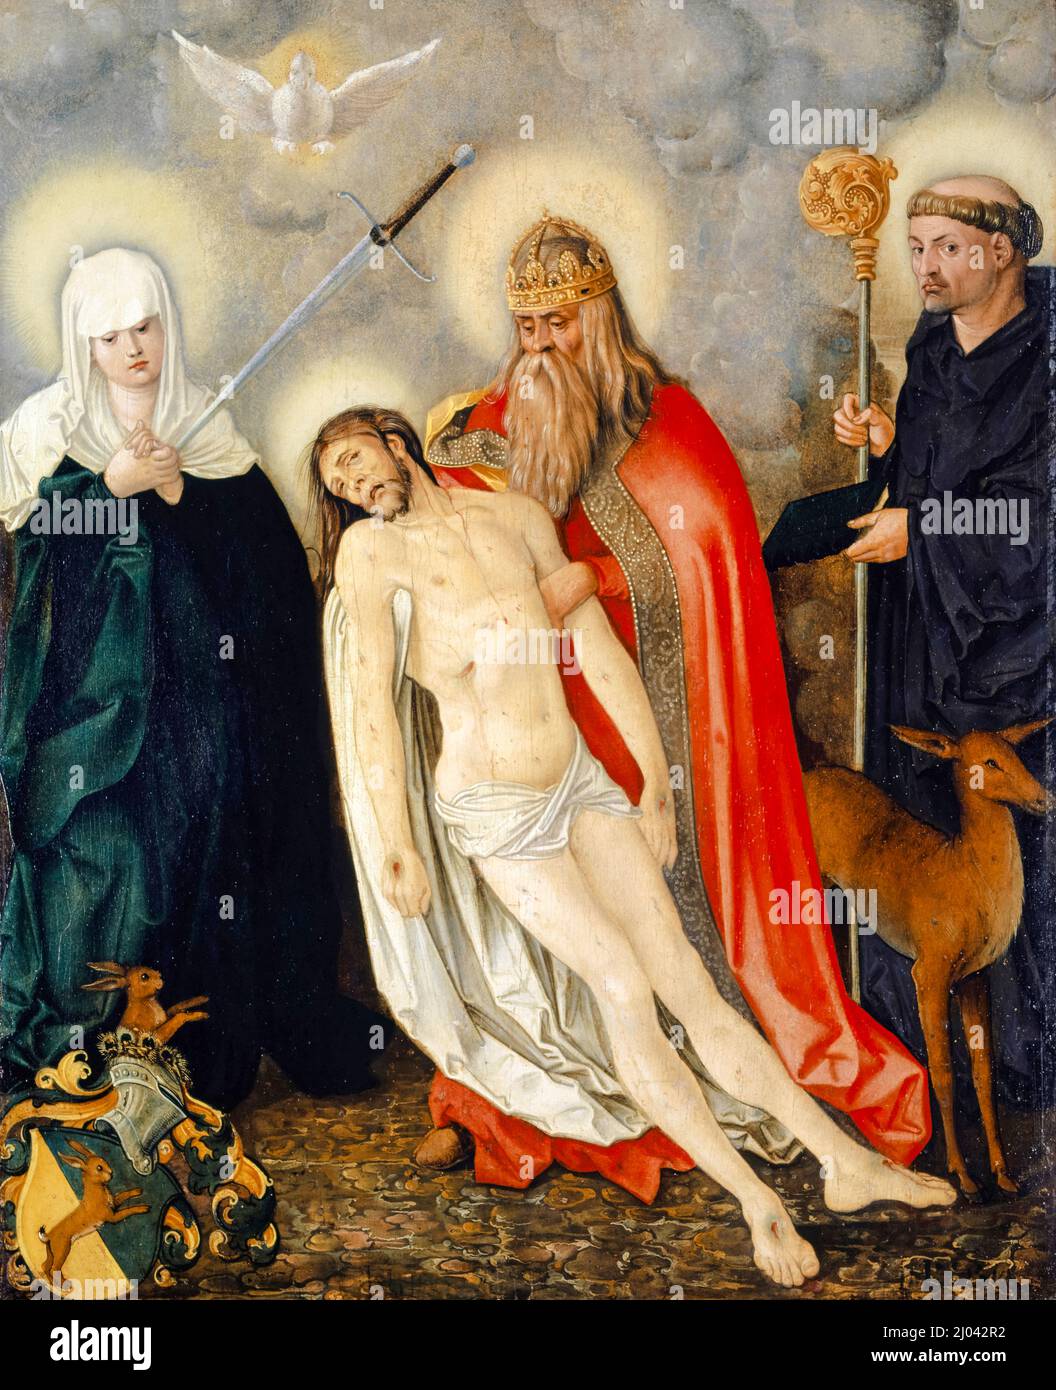 The Holy Trinity between the Lady of Sorrows and Saint Giles, oil on wood painting by Hans Baldung Grien, 1513-1516 Stock Photo